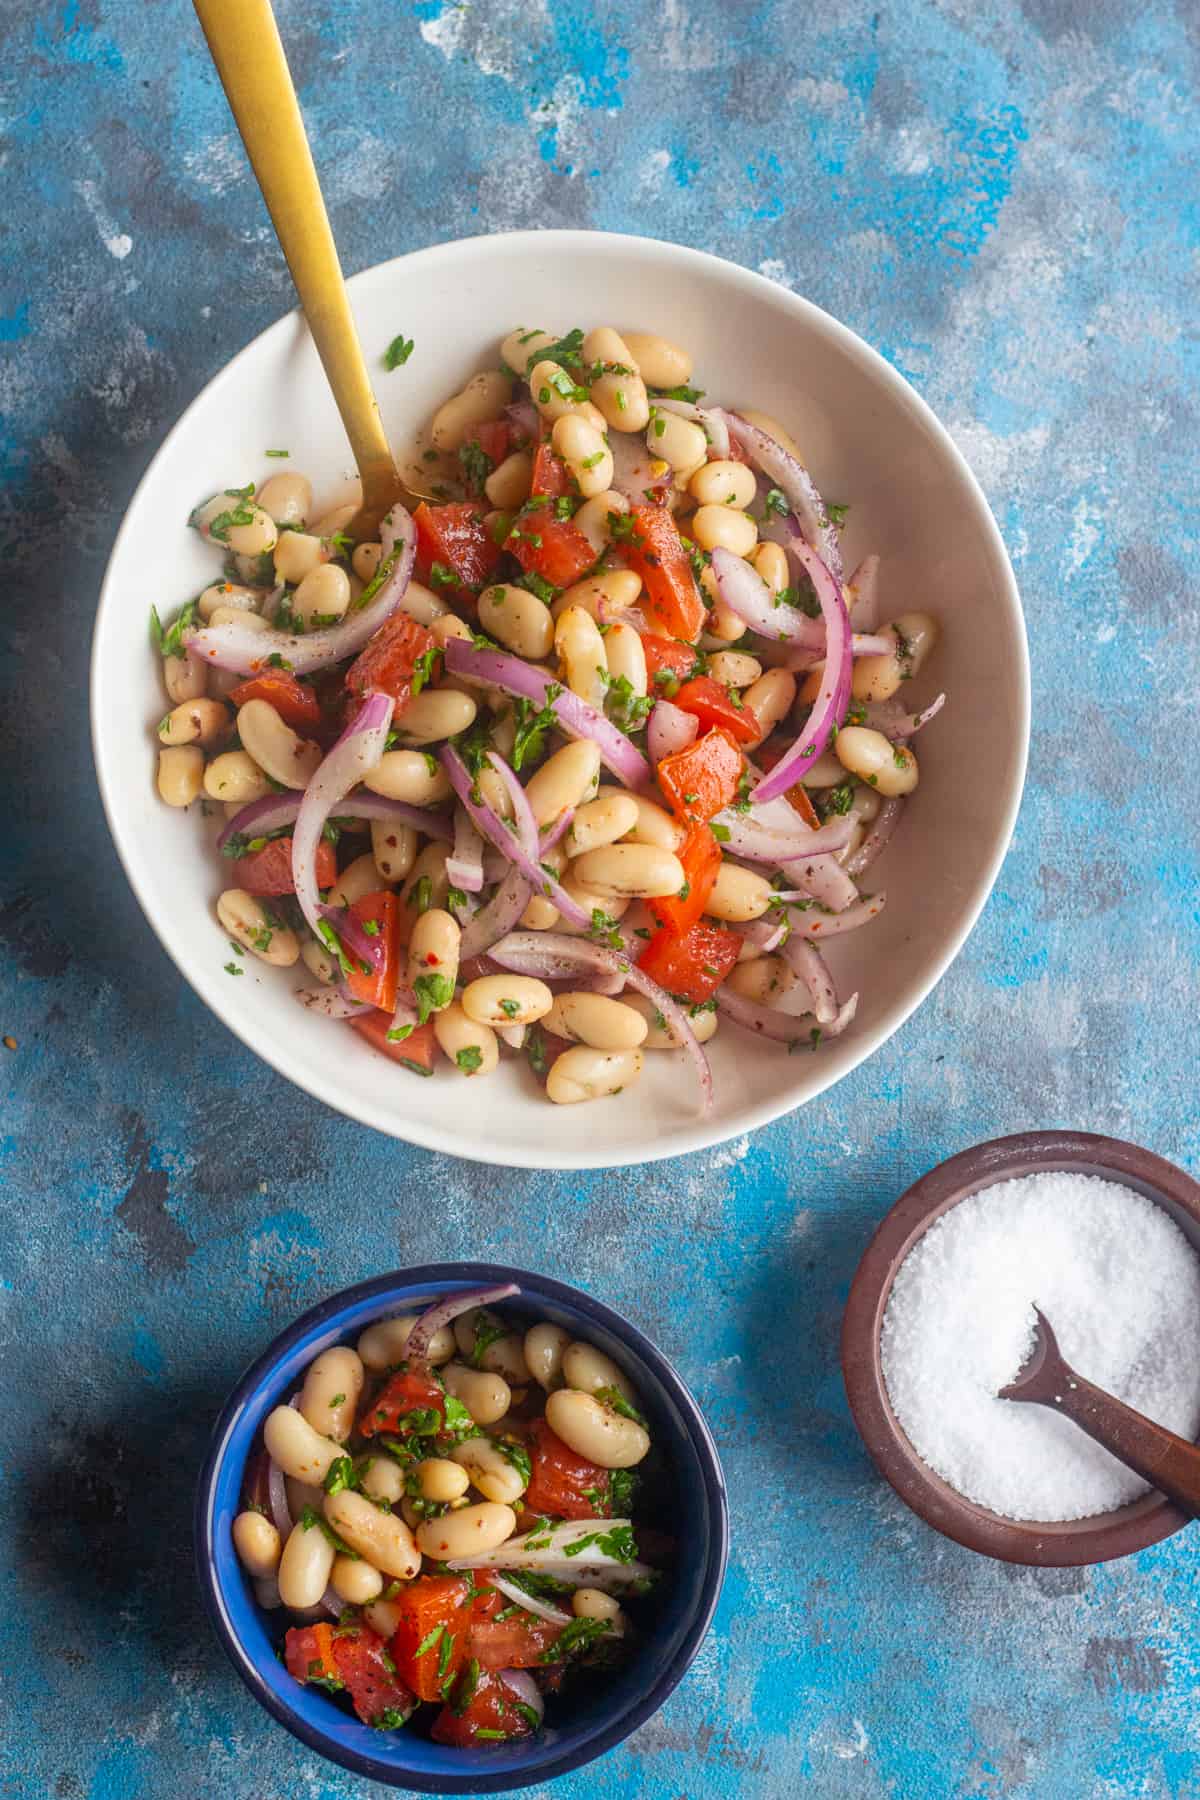 This Turkish white bean salad is ready in just 10 minutes. It's an easy and tasty side dish that pairs nicely with many Mediterranean flavors.
